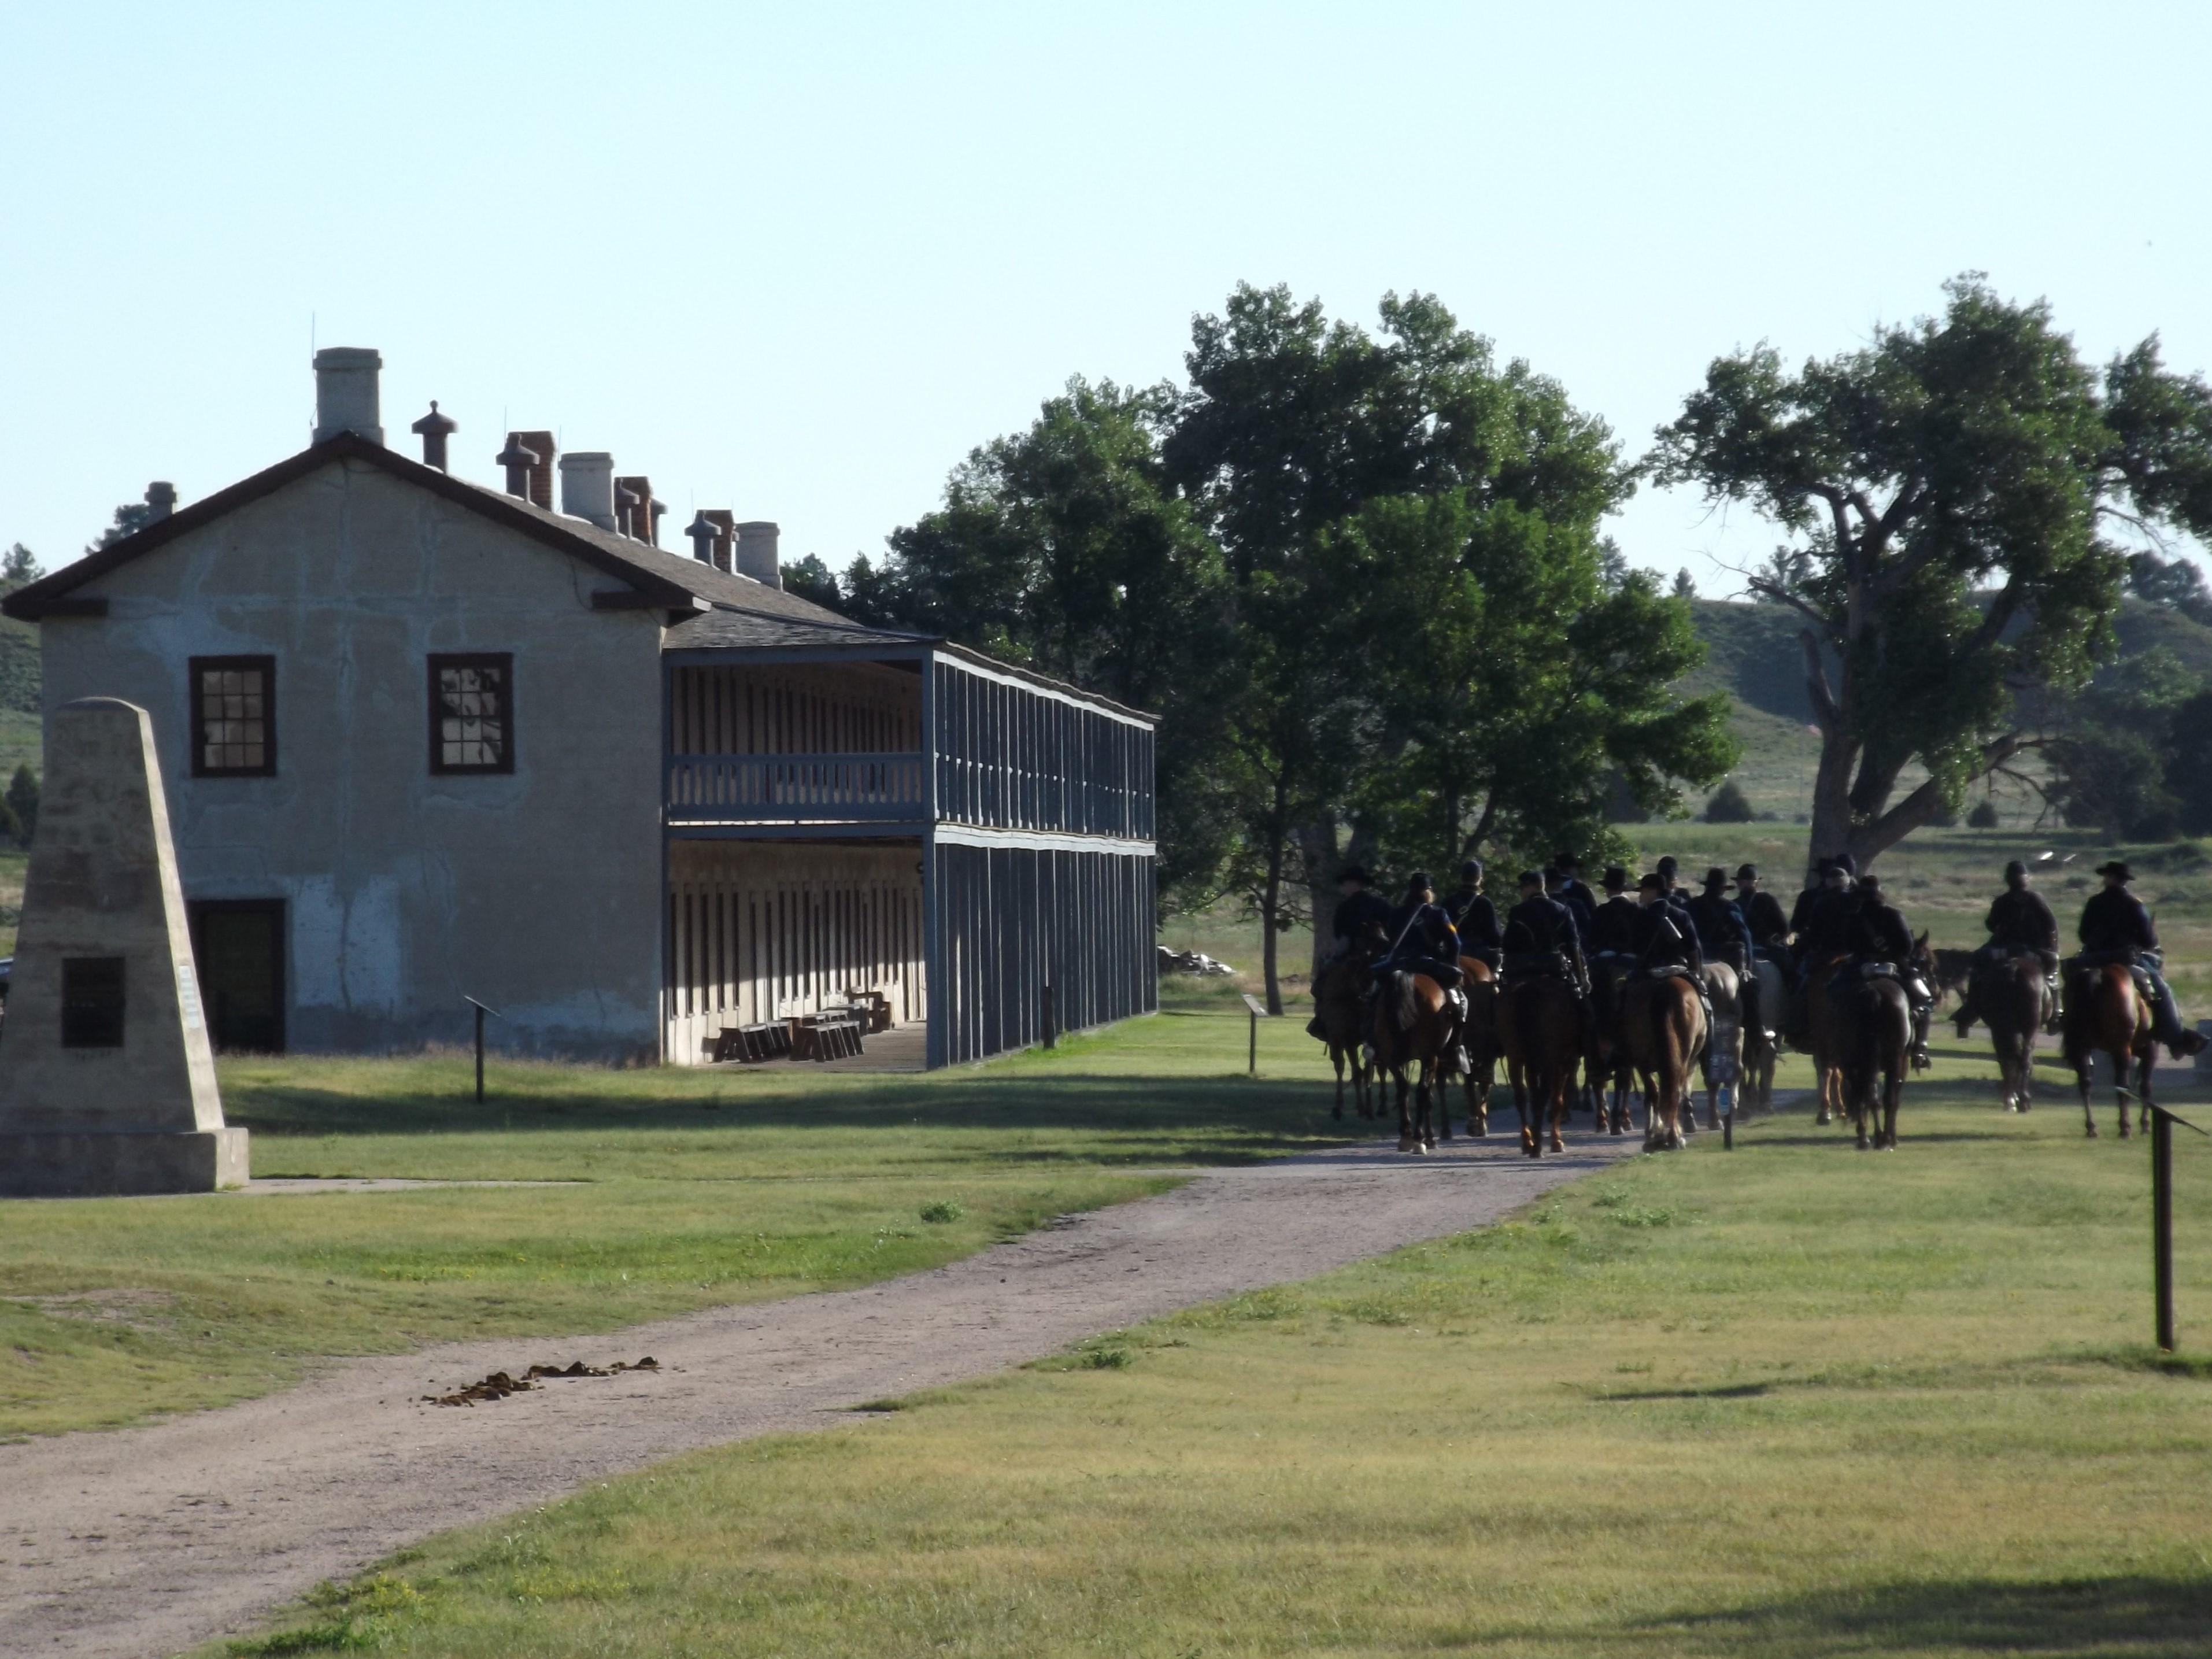 A group of mounted individuals ride hors near a concrete historic structure.